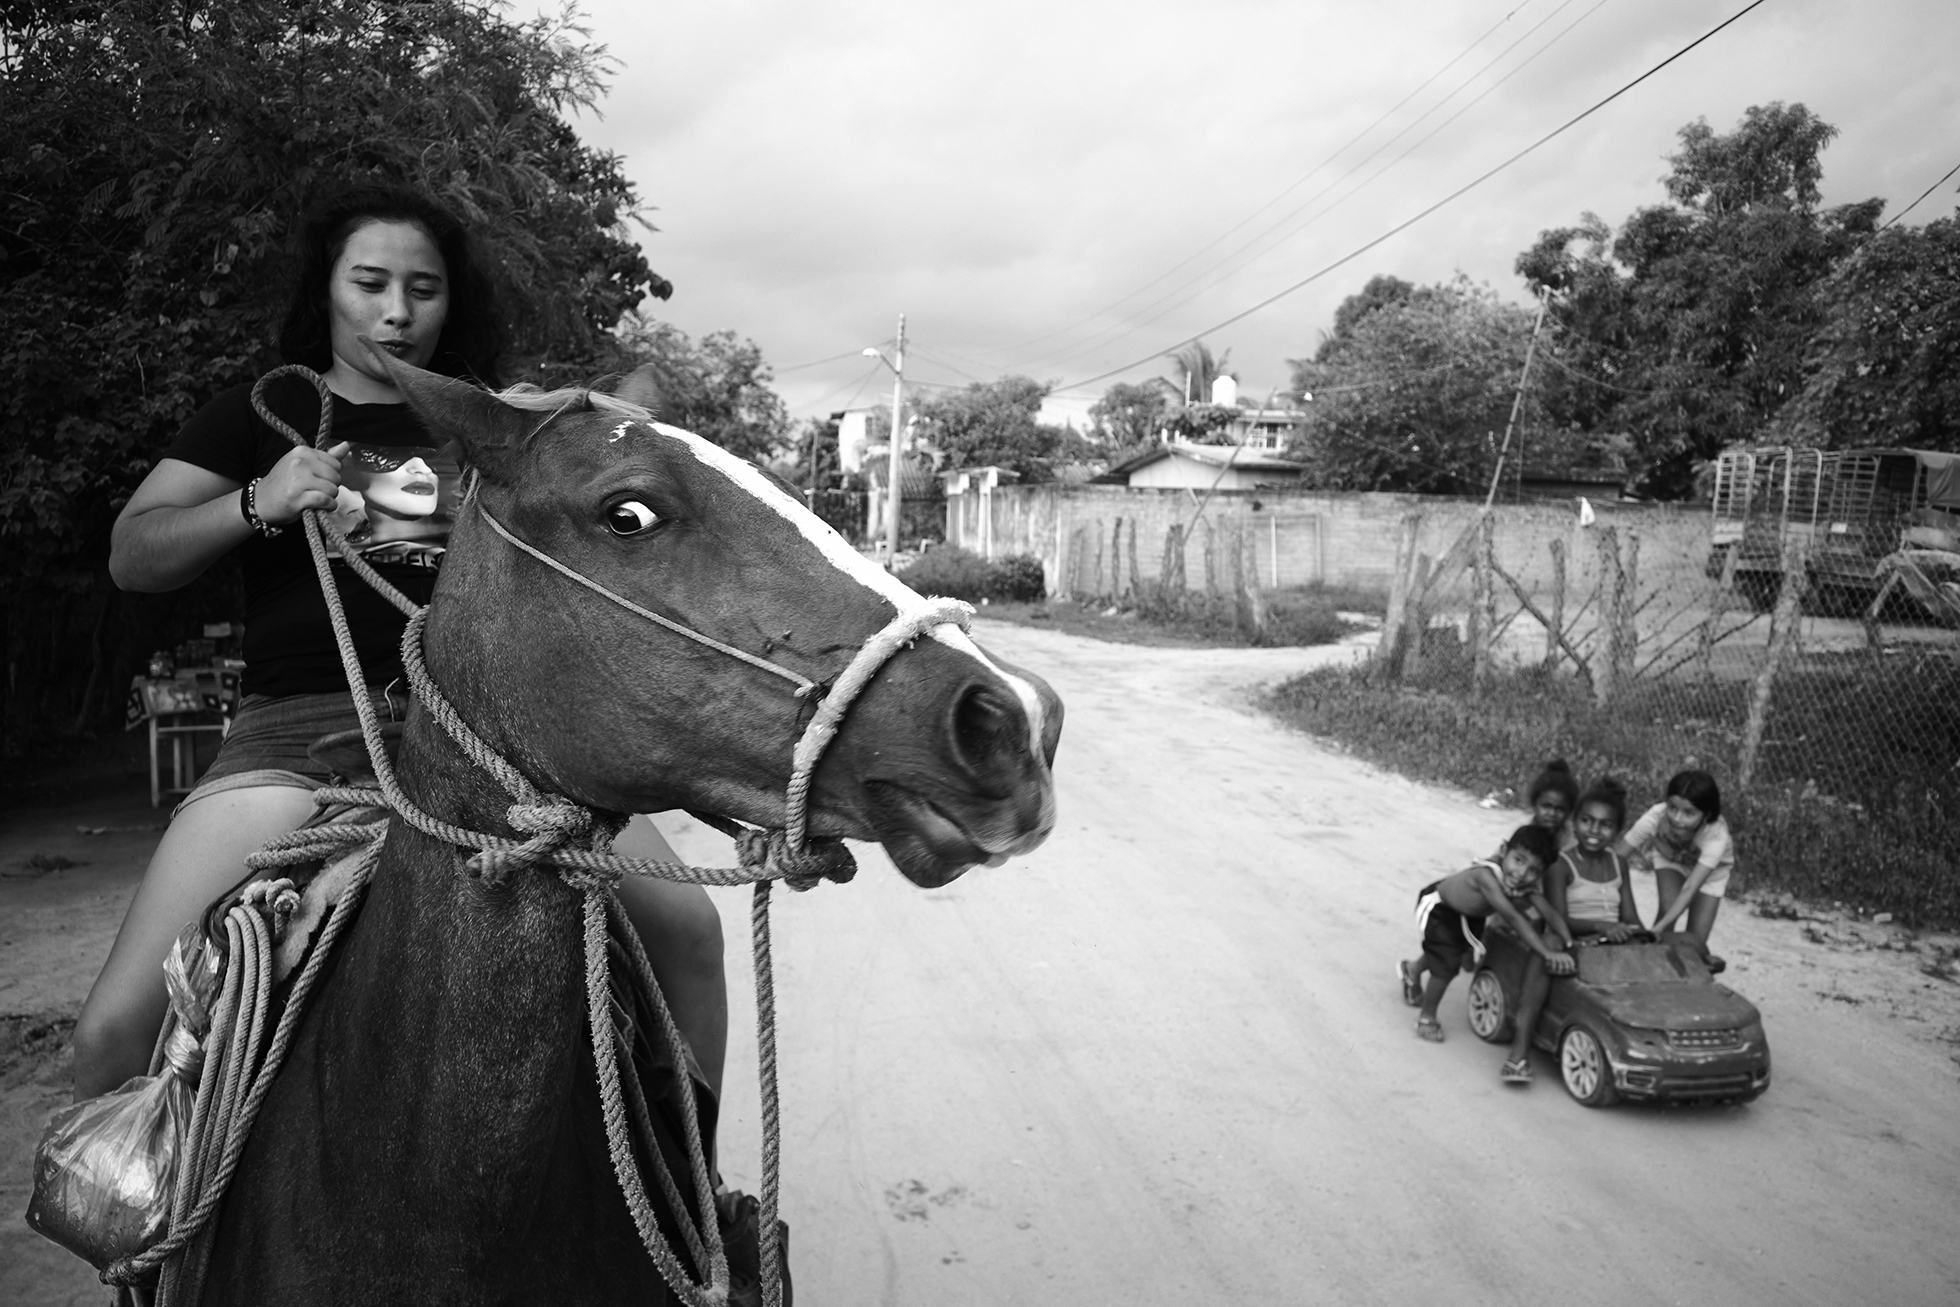 A woman rides a horse down a dirt road while four children in and around a ride-on toy car look on.